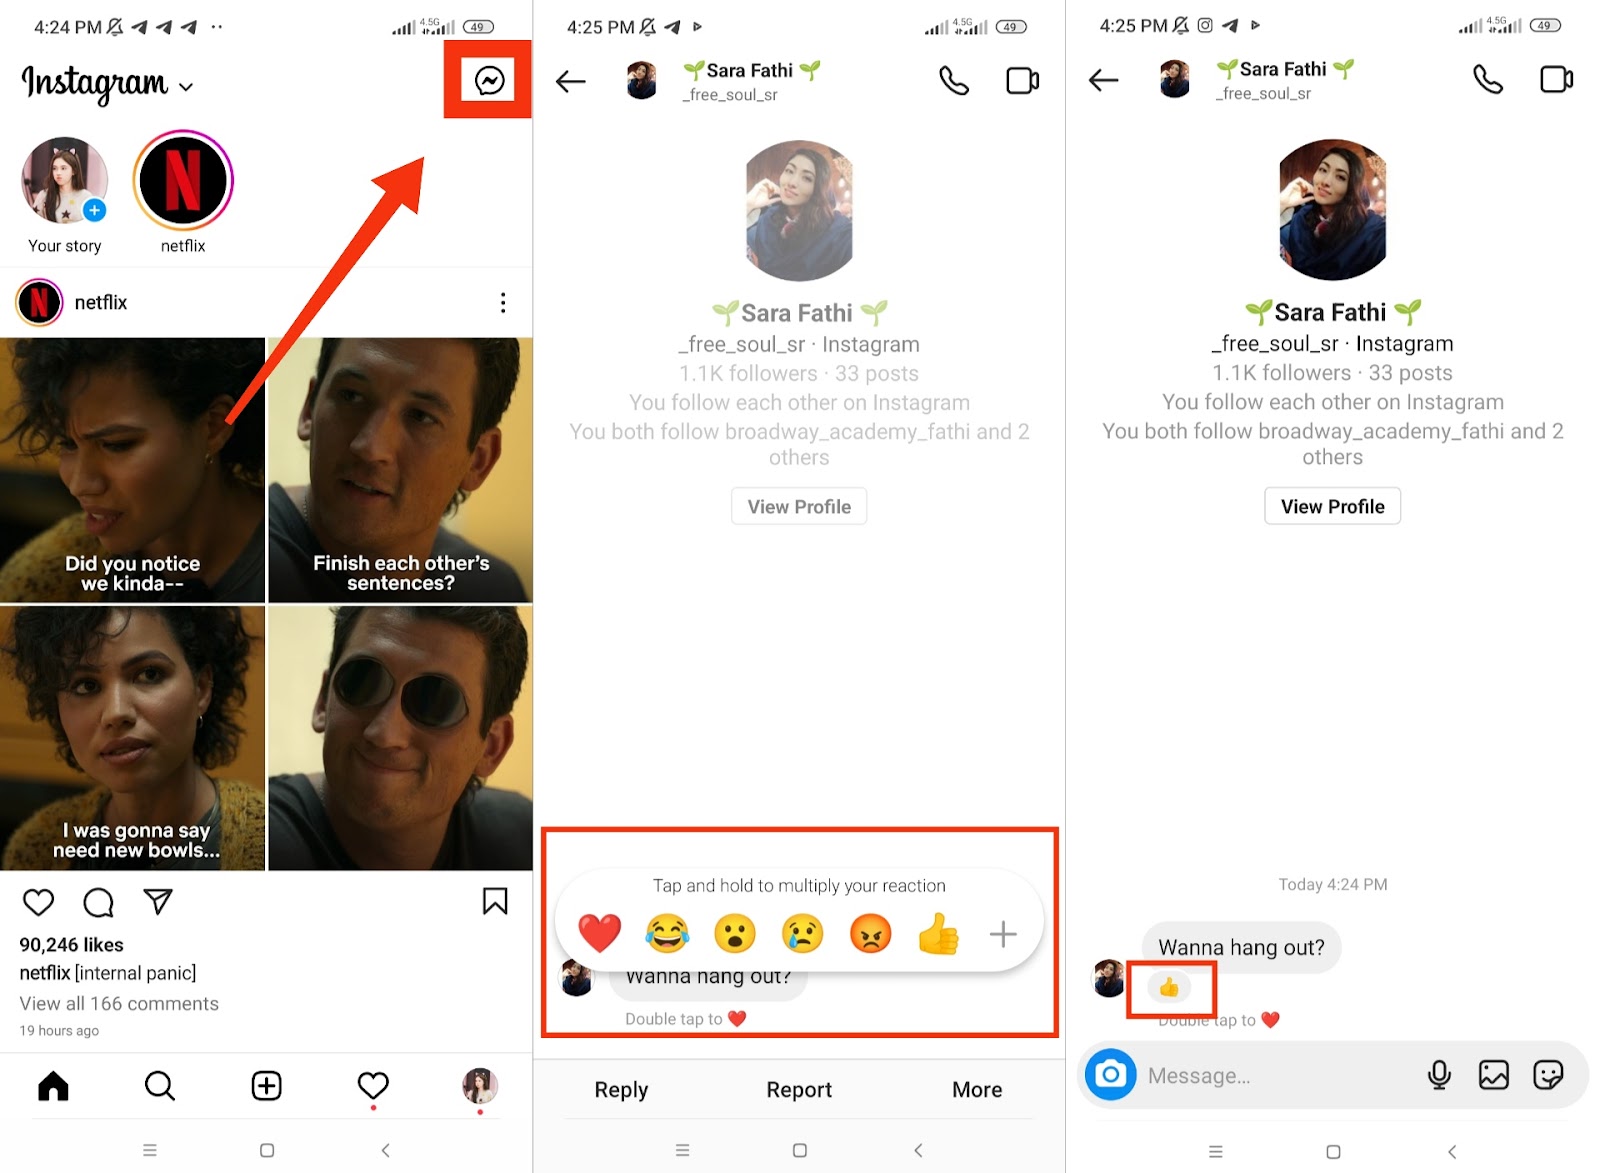 how to react to messages on Instagram